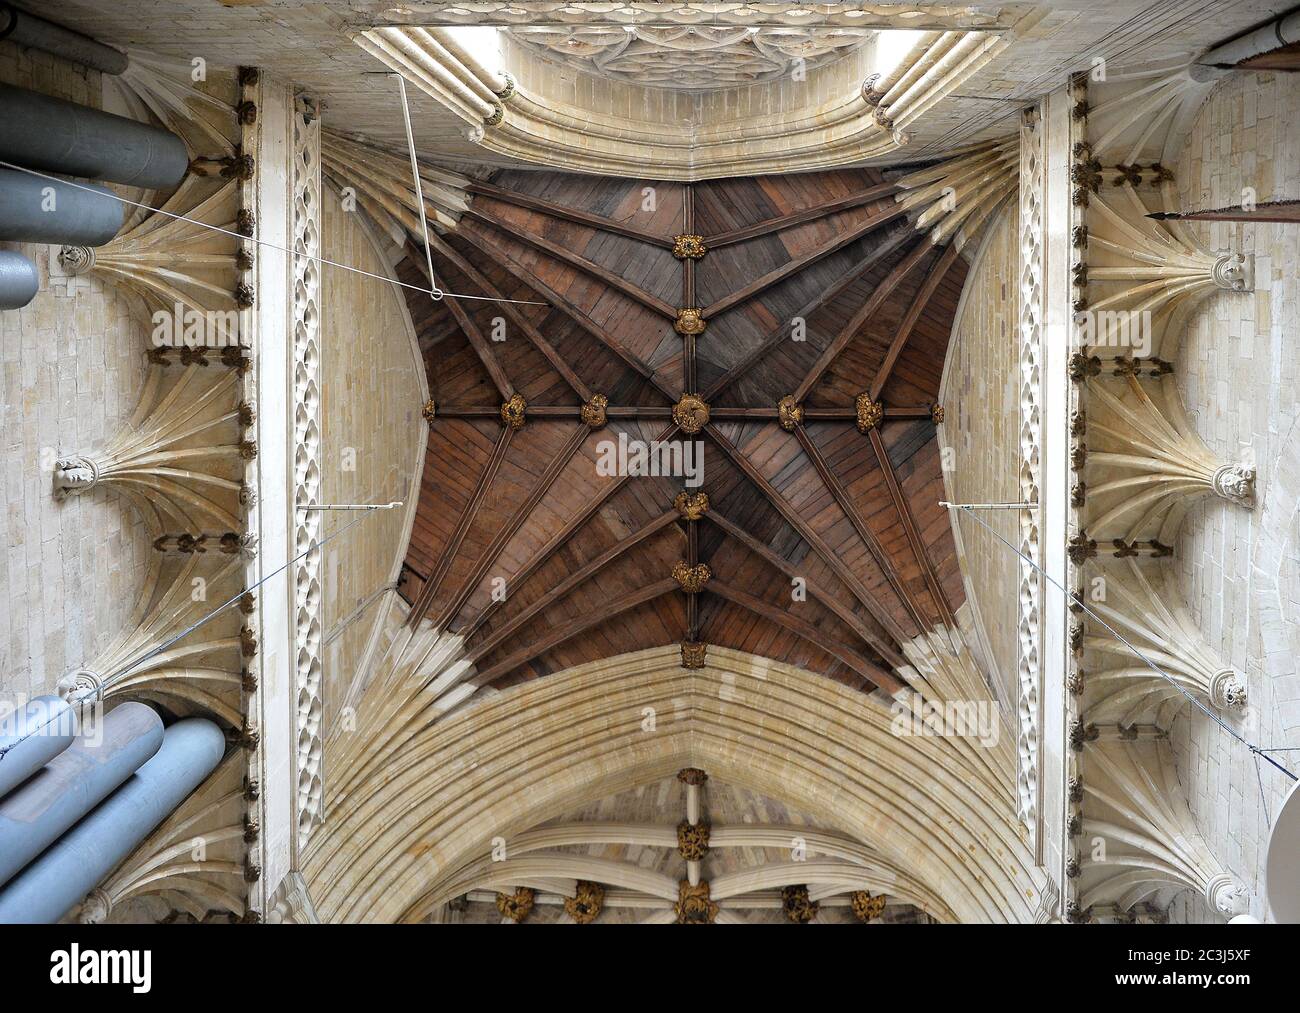 Timber vaulted ceiling - Exeter cathedral Stock Photo